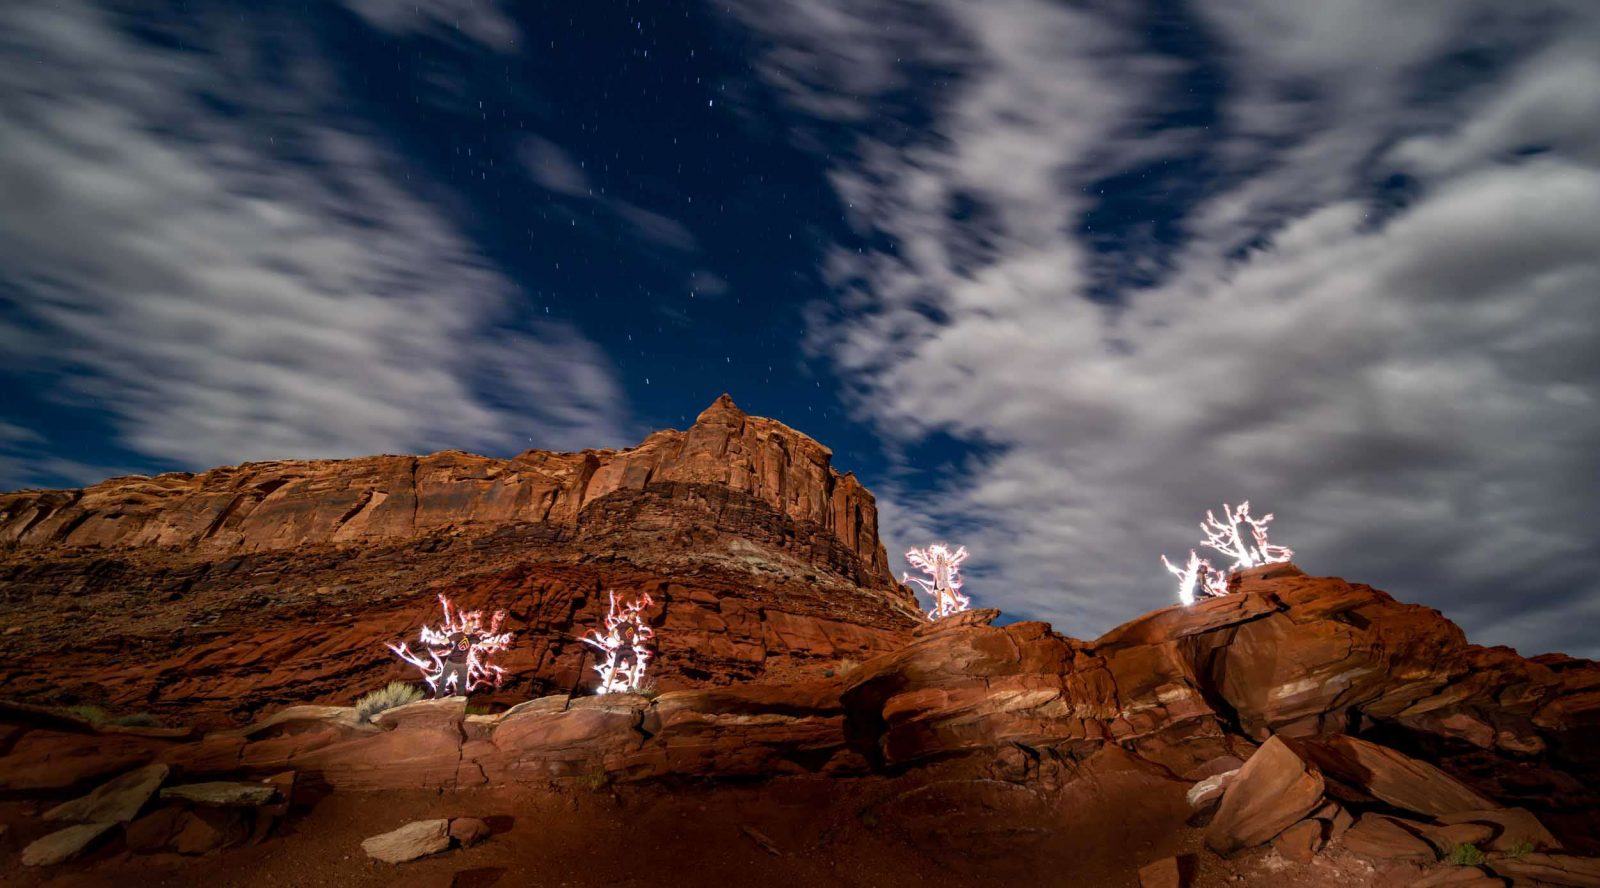 Our 2022 Meteor Jam Group Light Painting